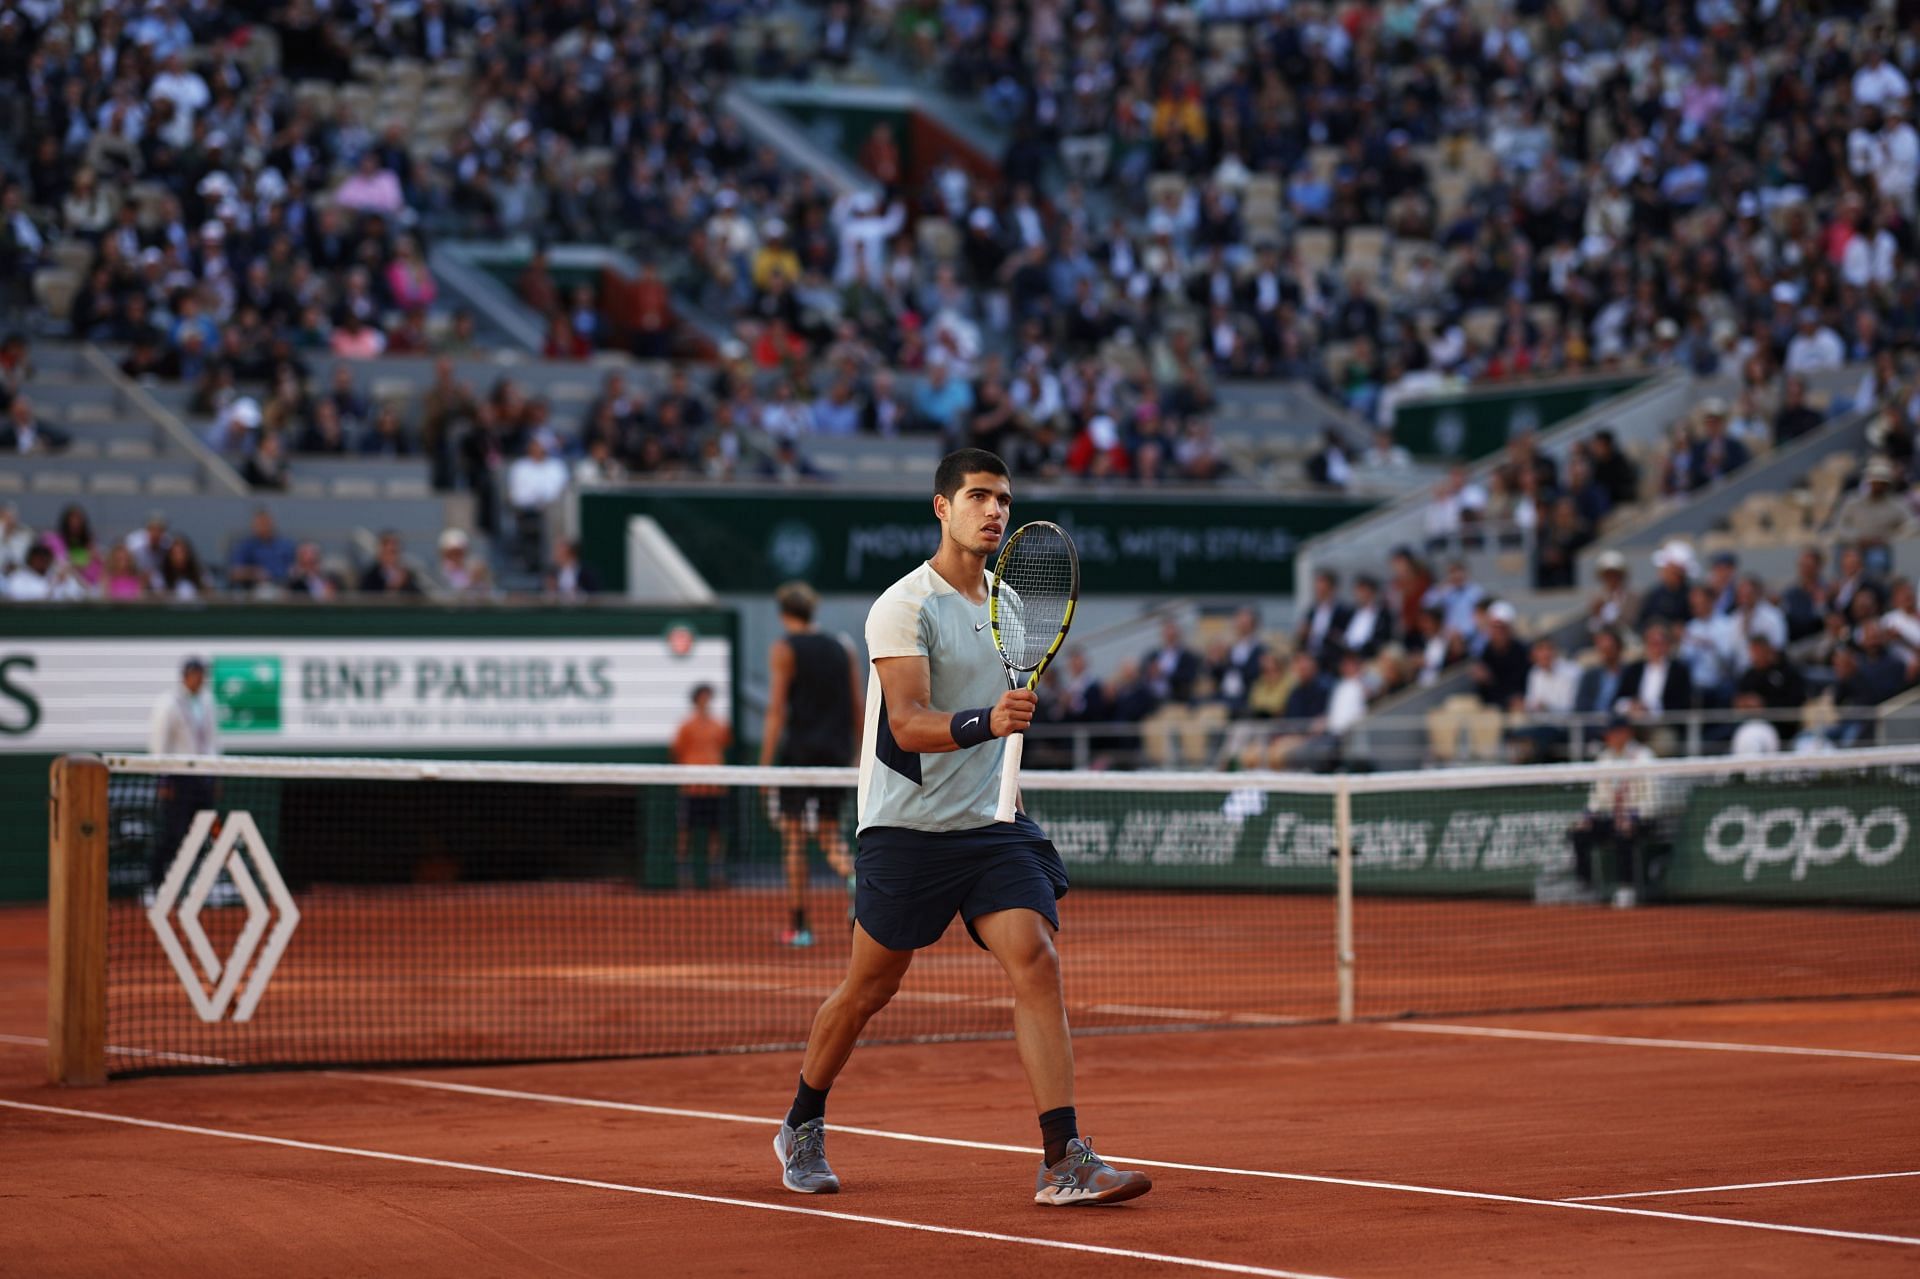 Carlos Alcaraz in action at the 2022 French Open - Day 10